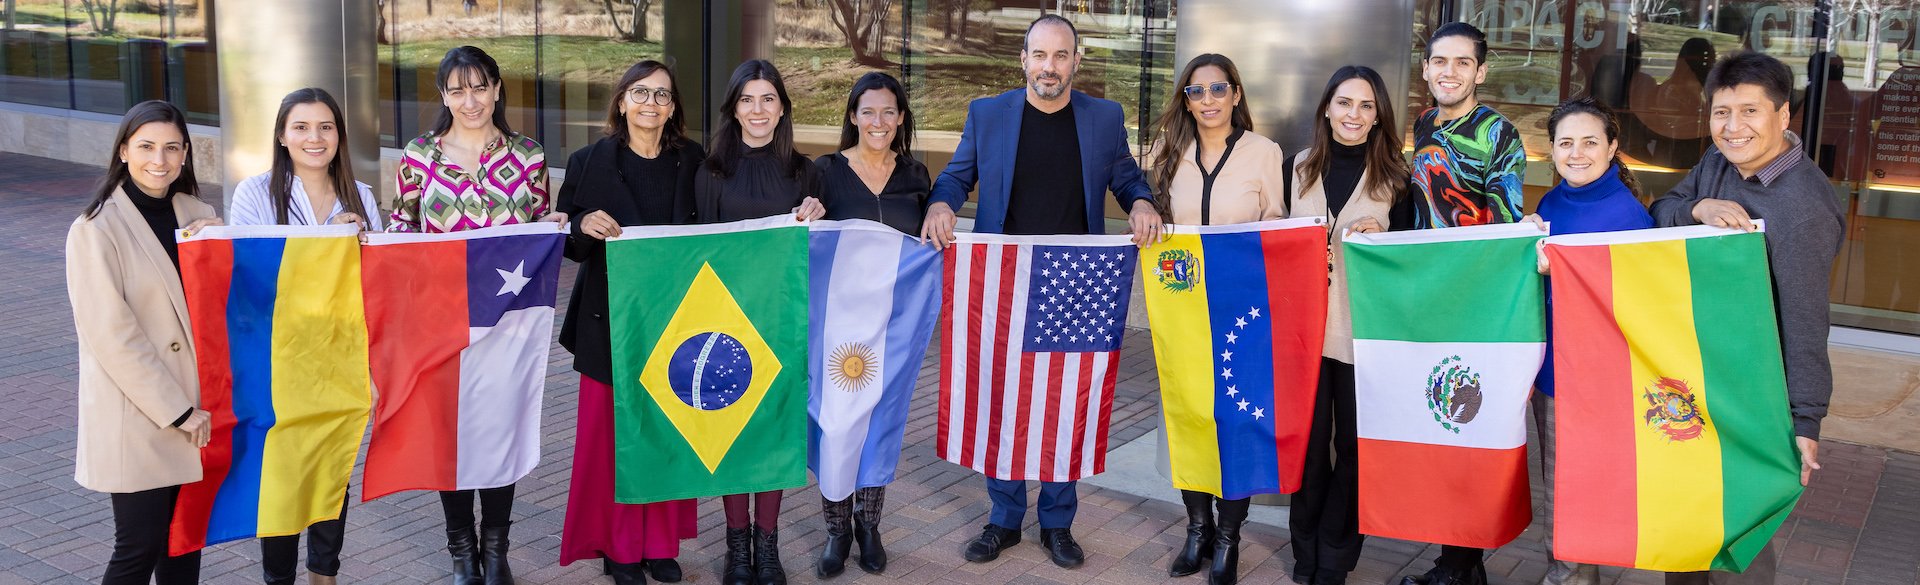 The eleven members of the HTP-Latin America Network and Dr. Joaquin Espinosa standing in a line with flags from their home countries